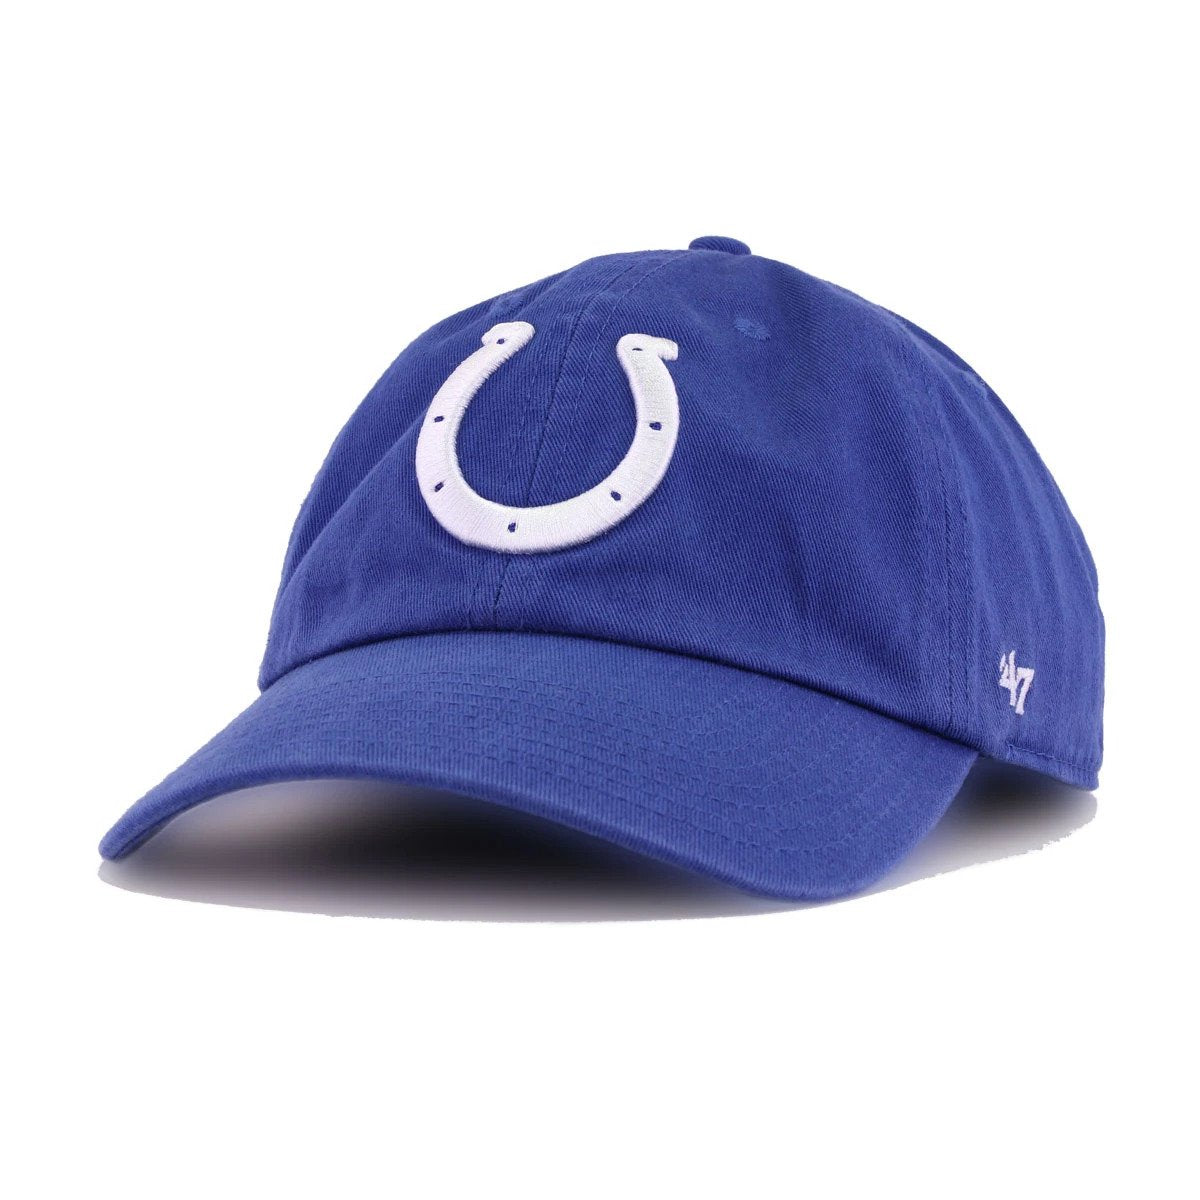 Shop Indianapolis Colts Snapback Hats & Fitted NFL Caps | Hat Heaven